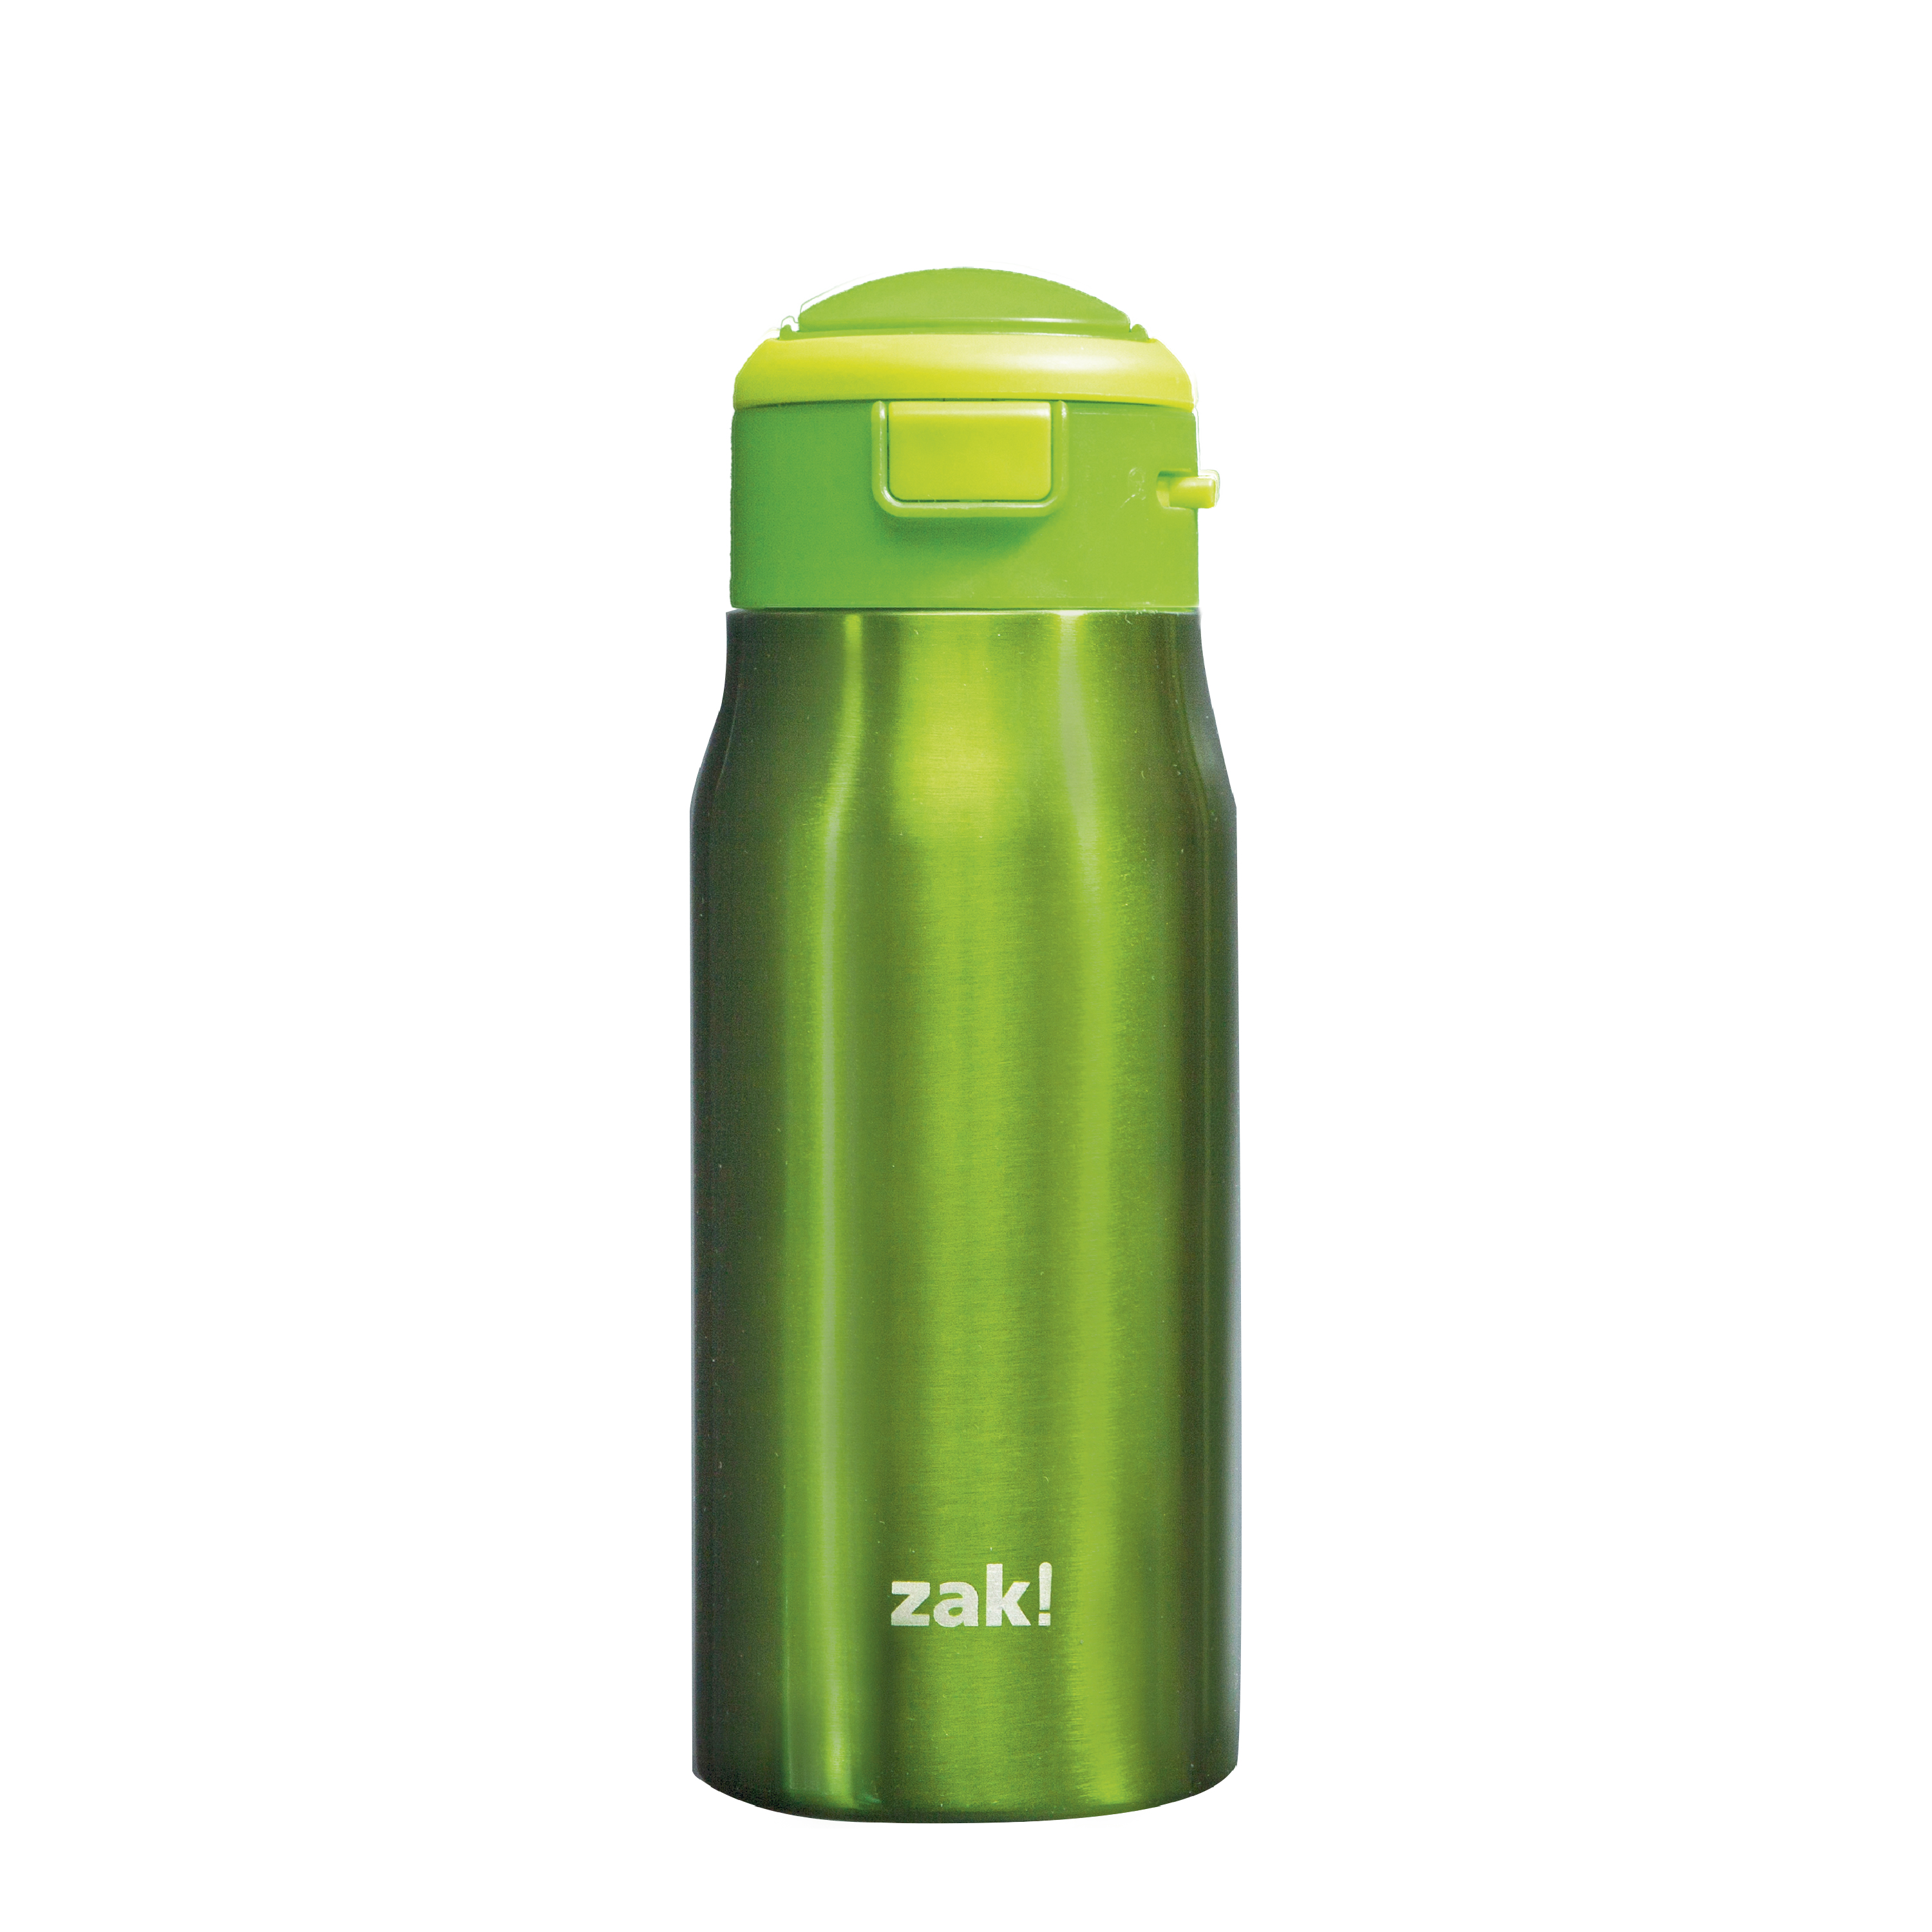 Mesa 13.5 ounce Double Wall Insulated Stainless Steel Water Bottle, Green slideshow image 1